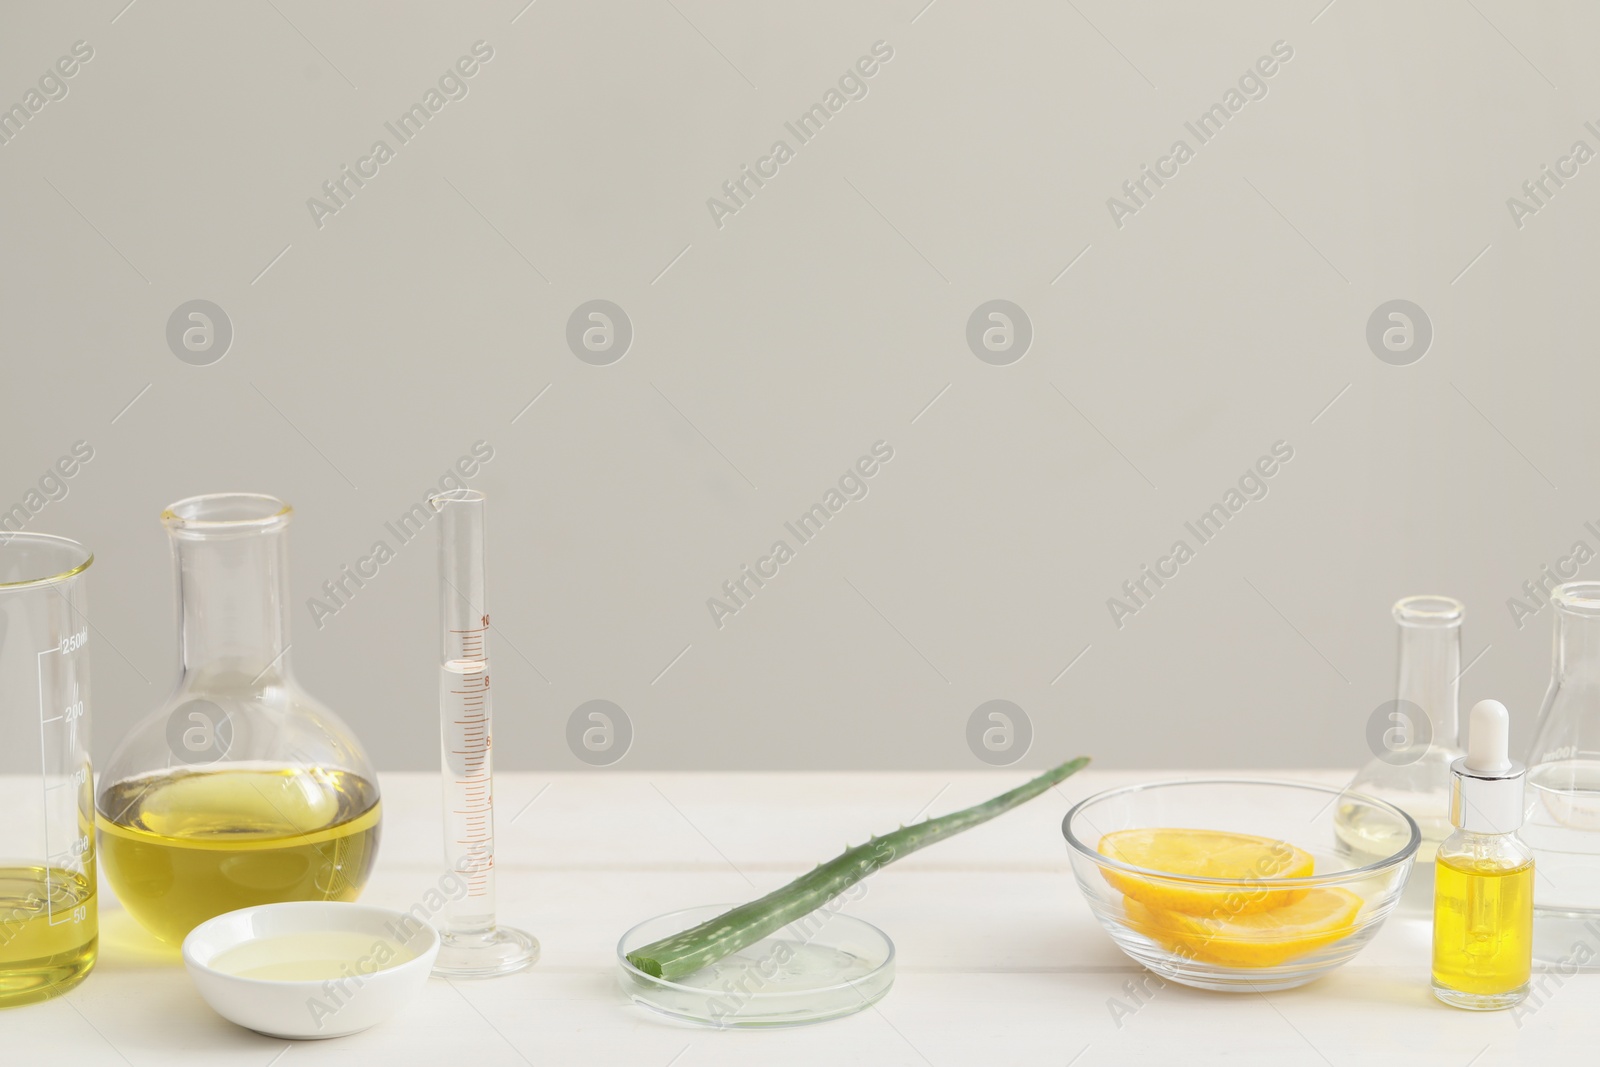 Photo of Developing cosmetic oil. Petri dish with aloe and laboratory dishware on white table, space for text